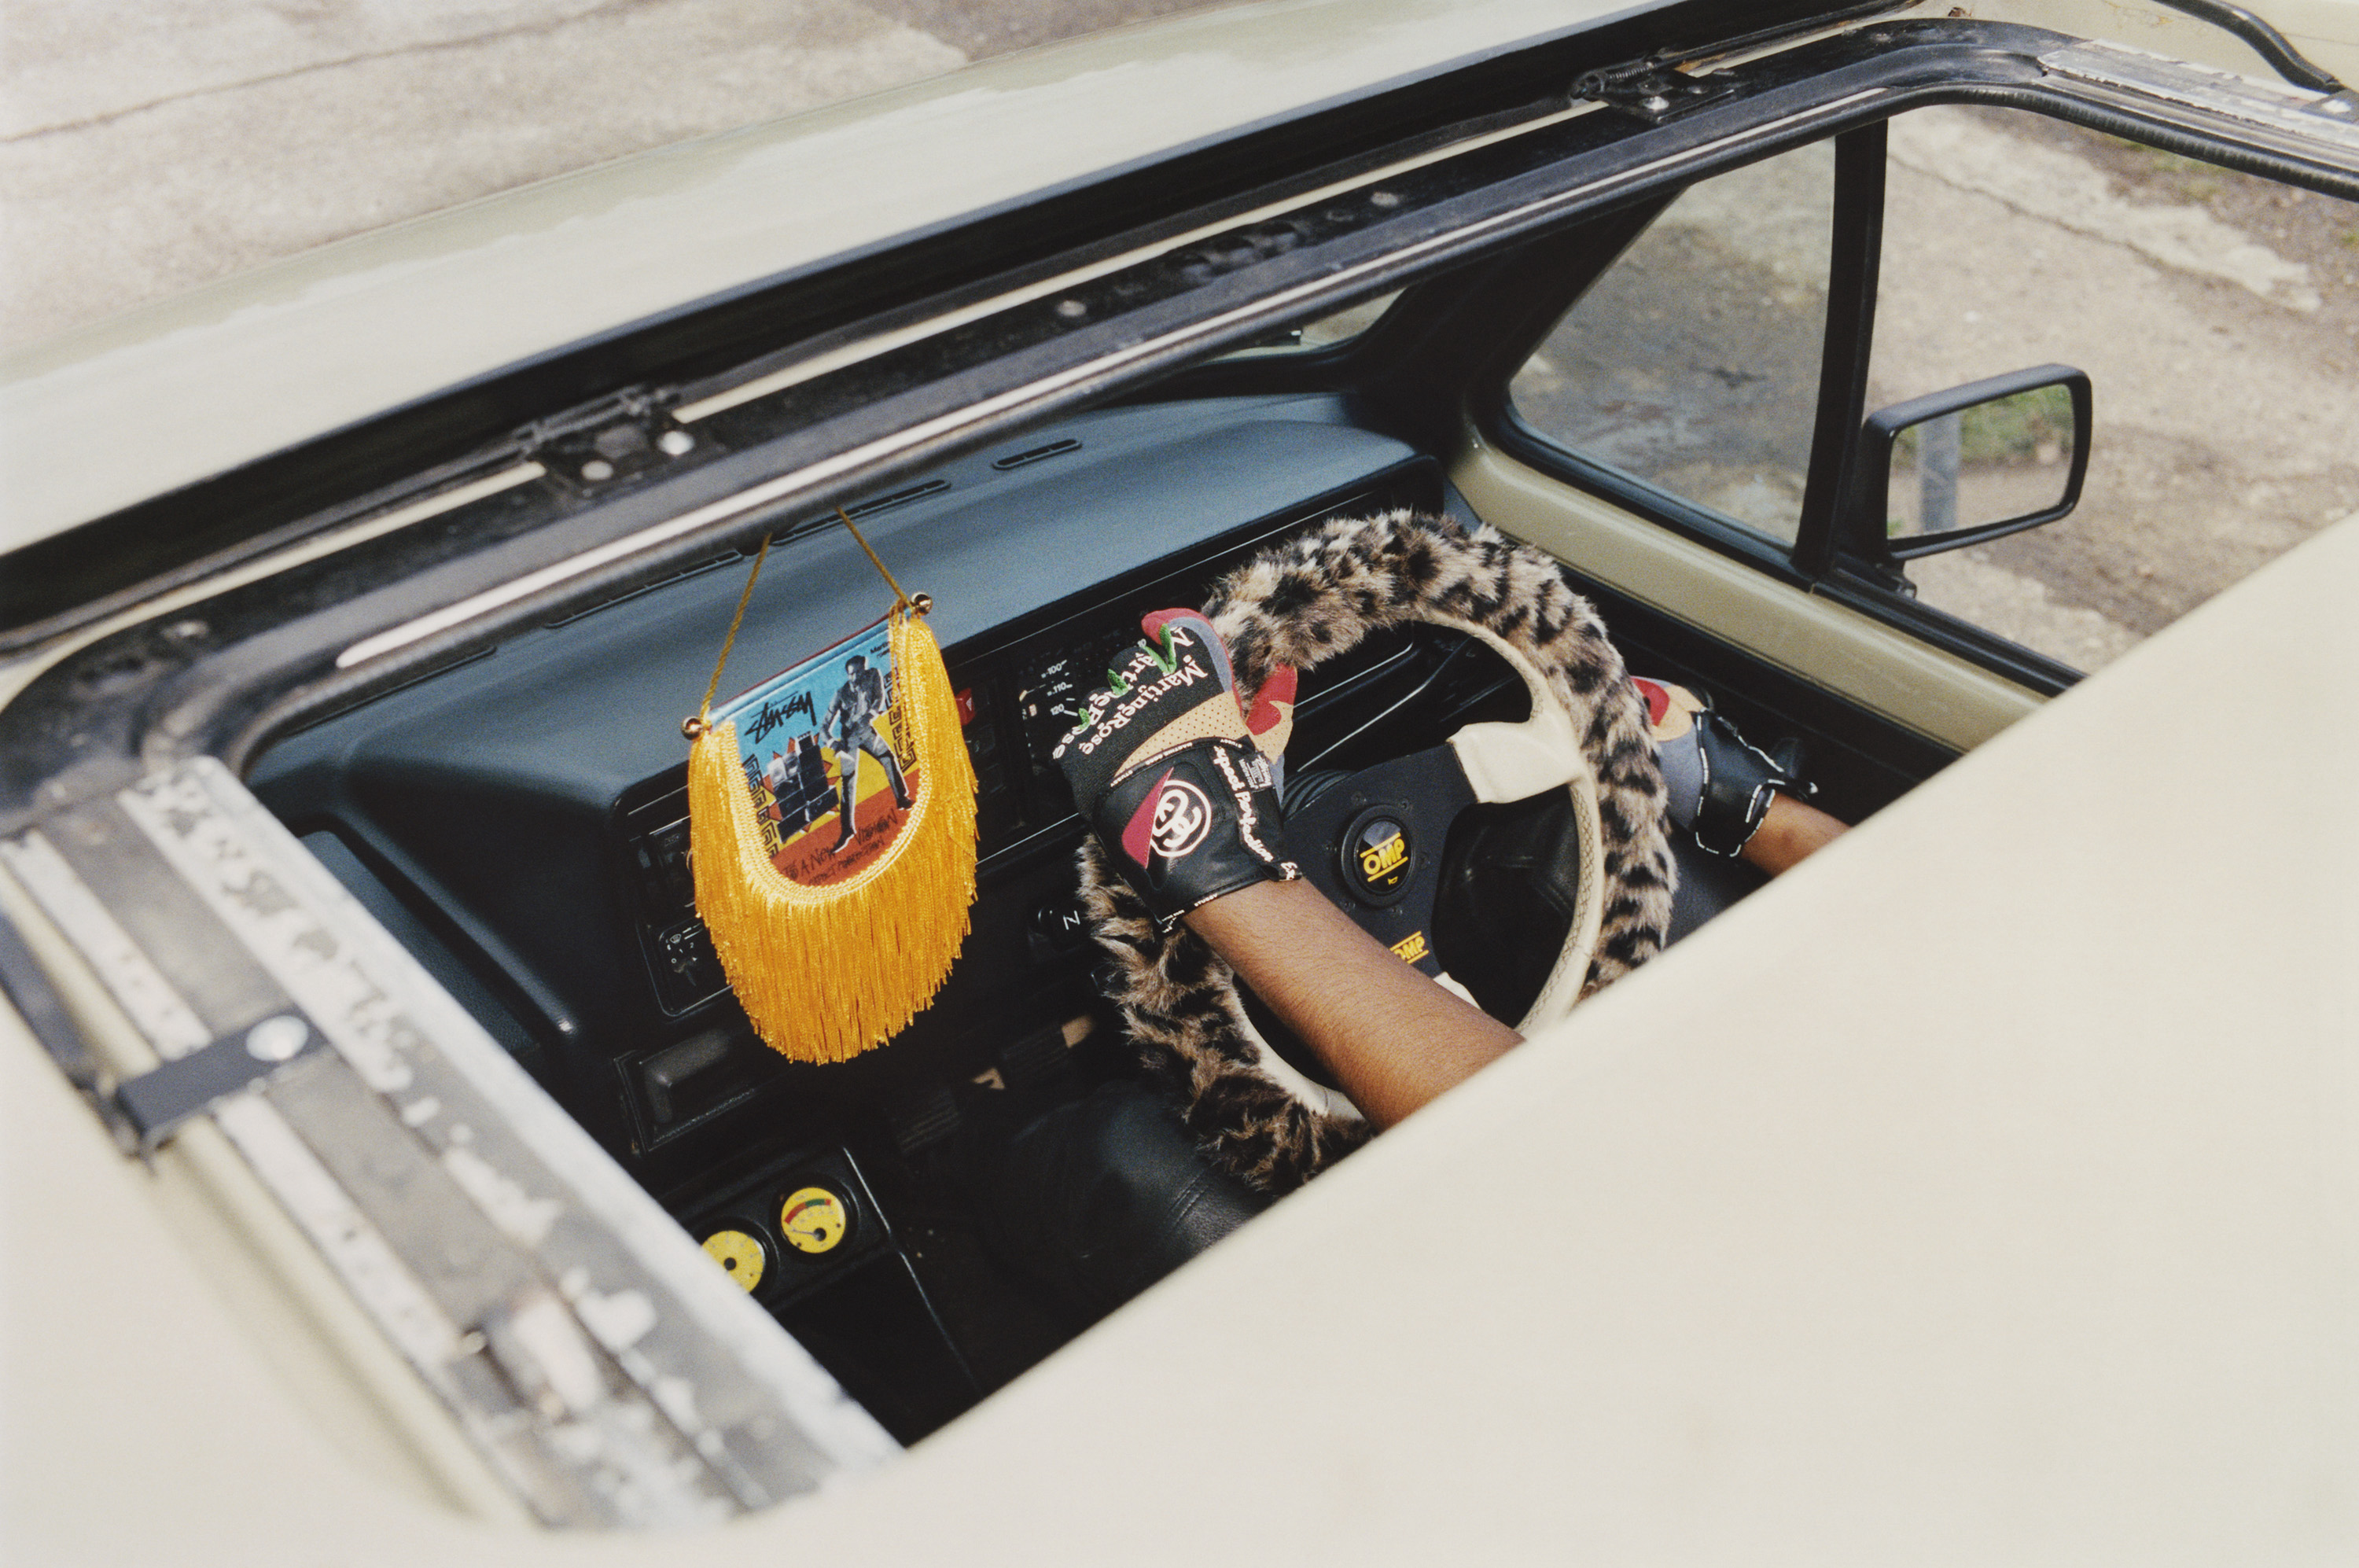 Martine Rose and Stüssy have united to accessorise your car